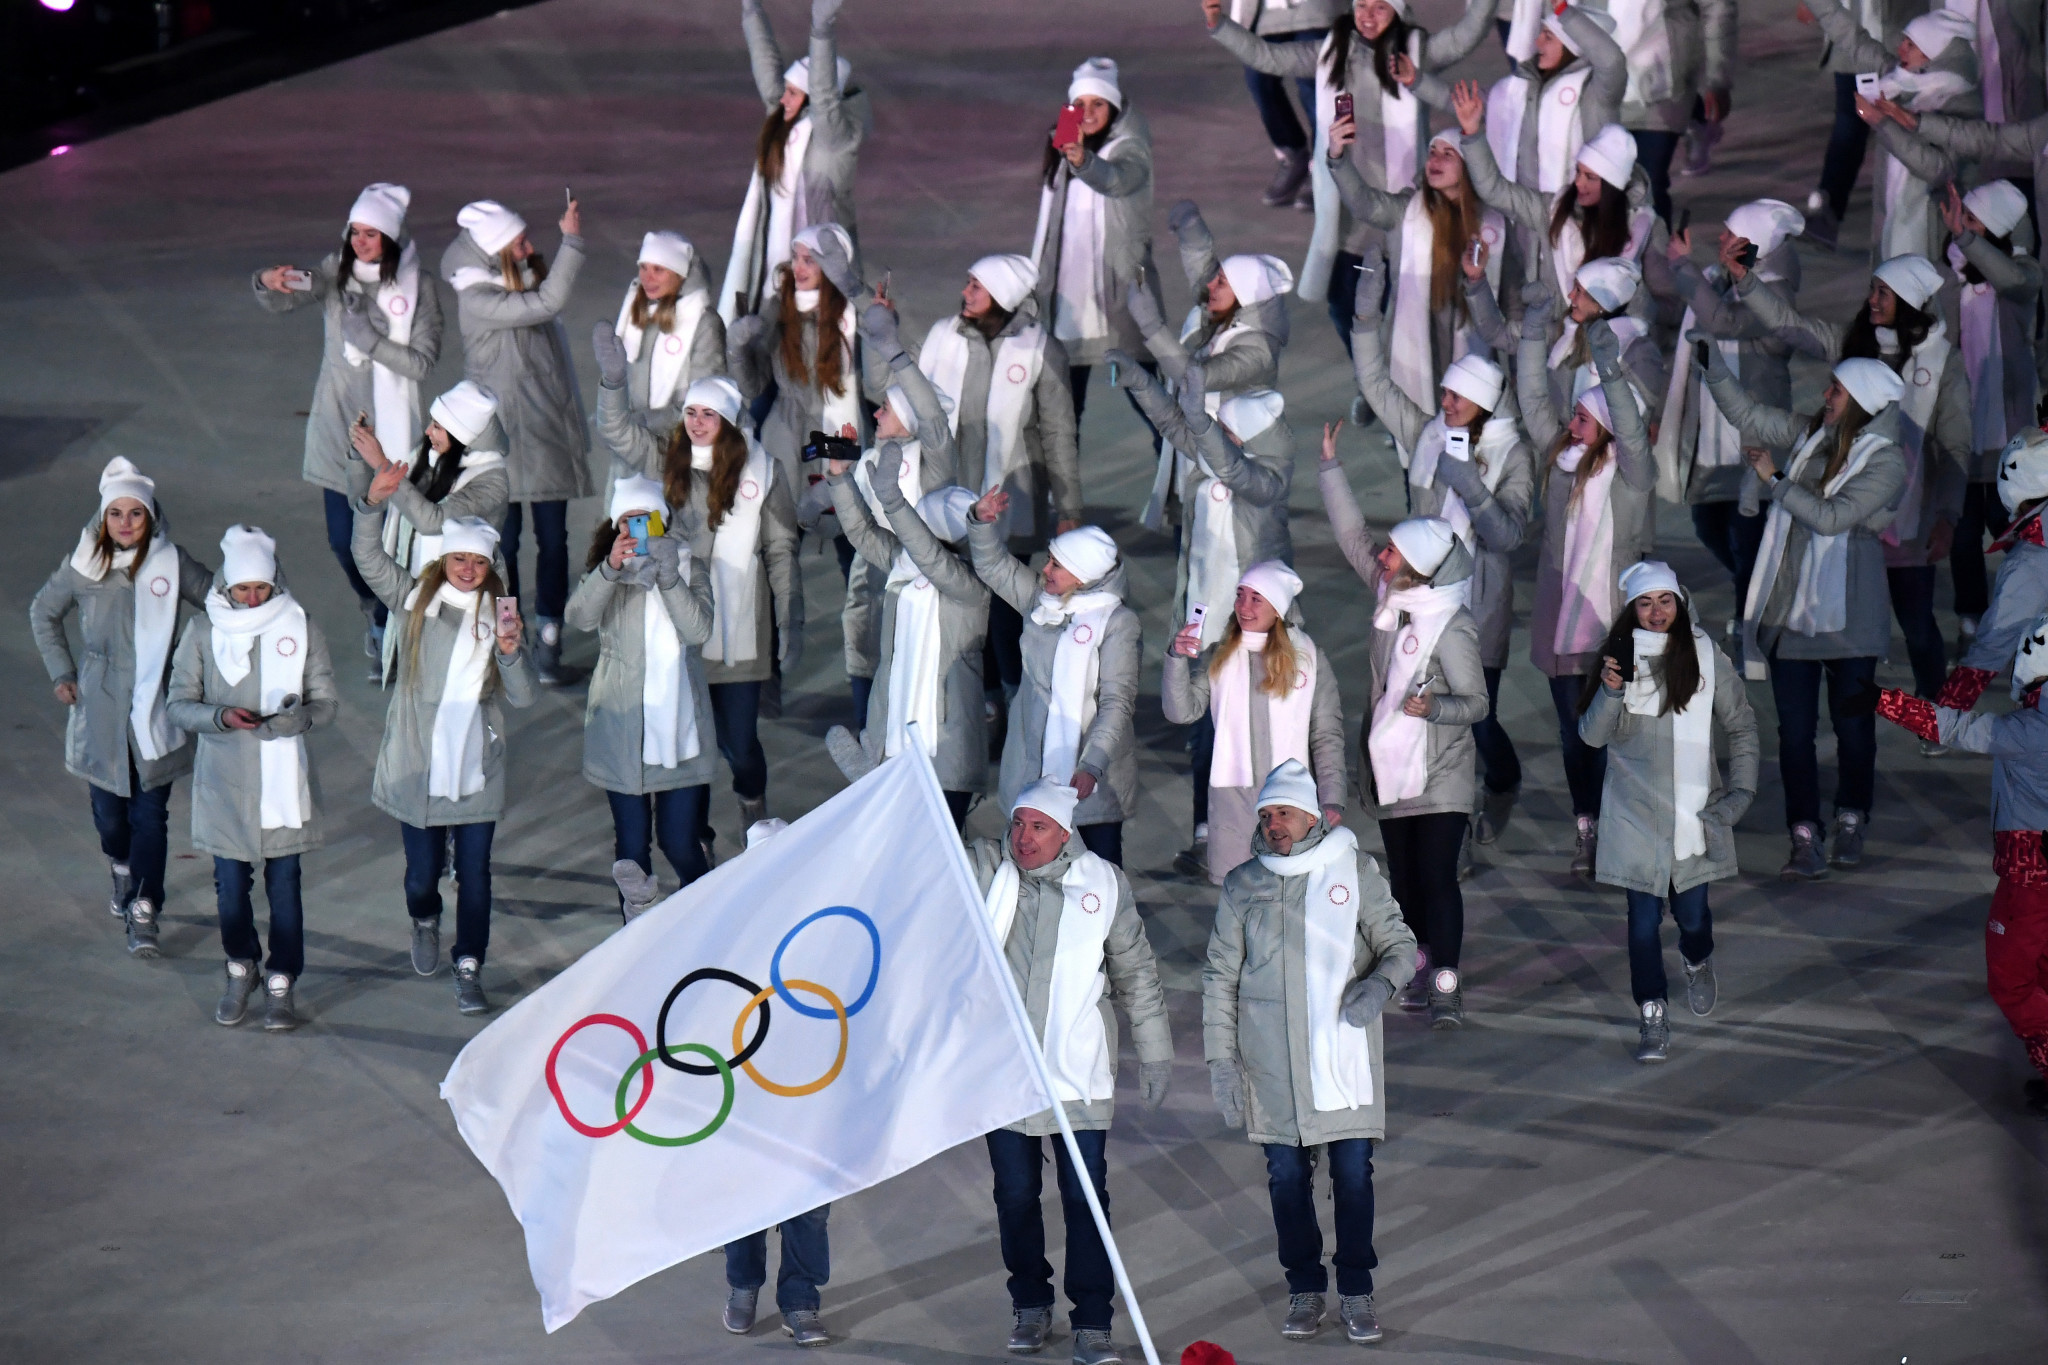 Russian athletes participated under a neutral flag at the Closing Ceremony of Pyeongchang 2018 ©Getty Images